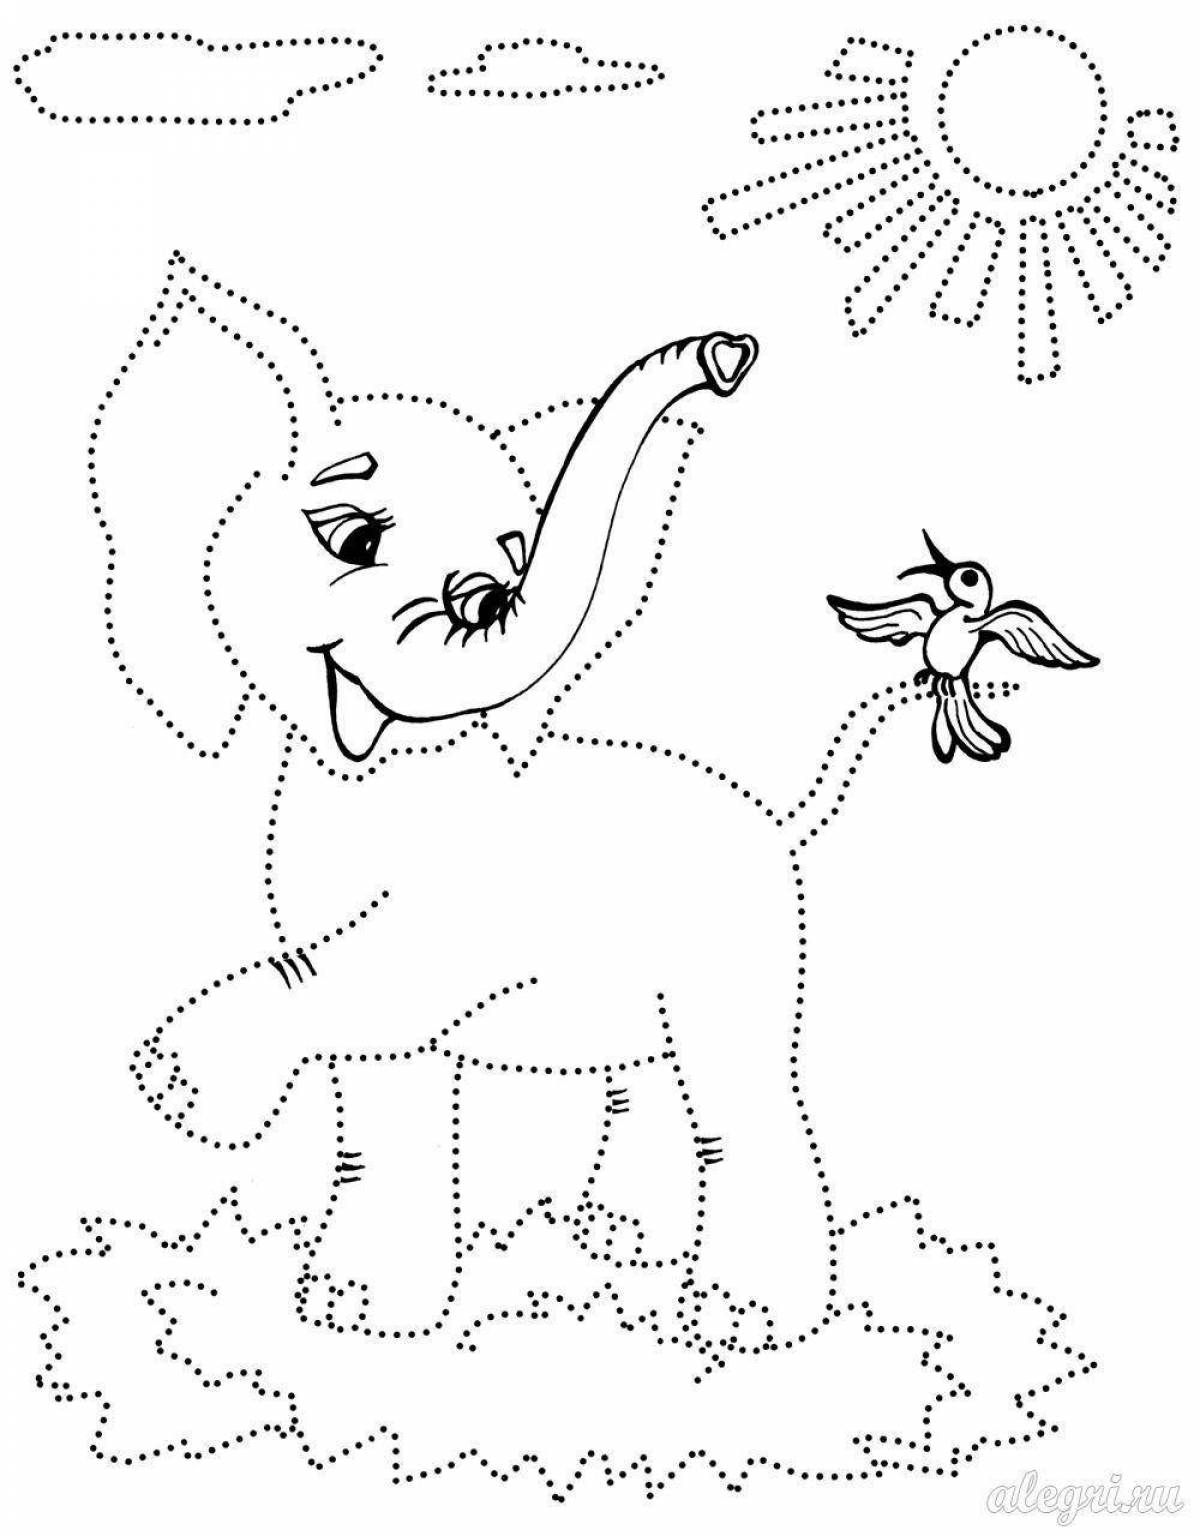 Playful dotted animal coloring page